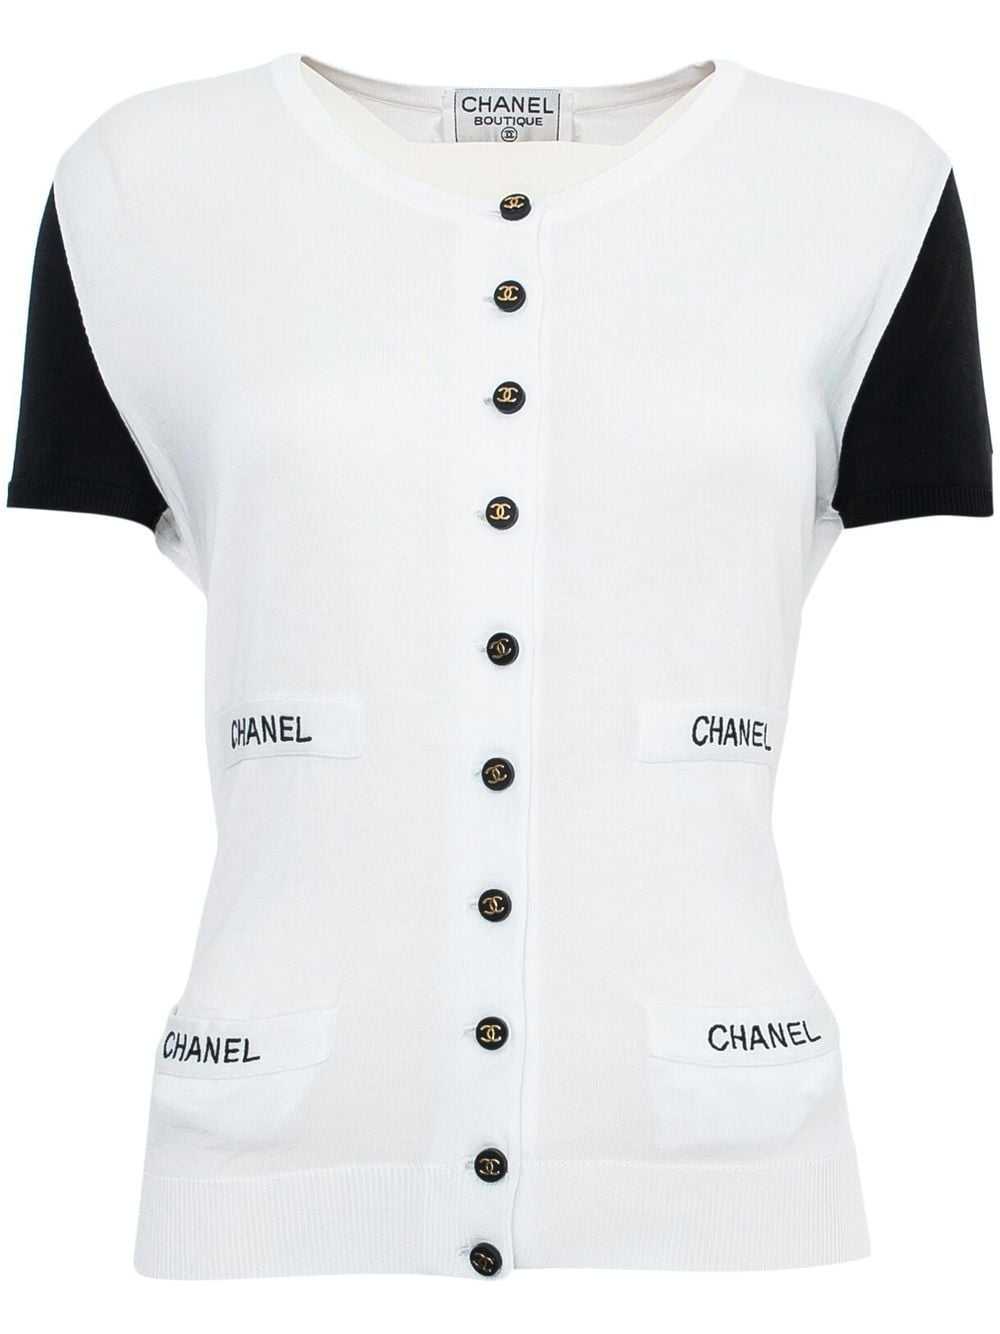 Chanel Logo Shirts - 89 For Sale on 1stDibs  chanel logo t shirt, chanel  tshirt logo, chanel logo t-shirt